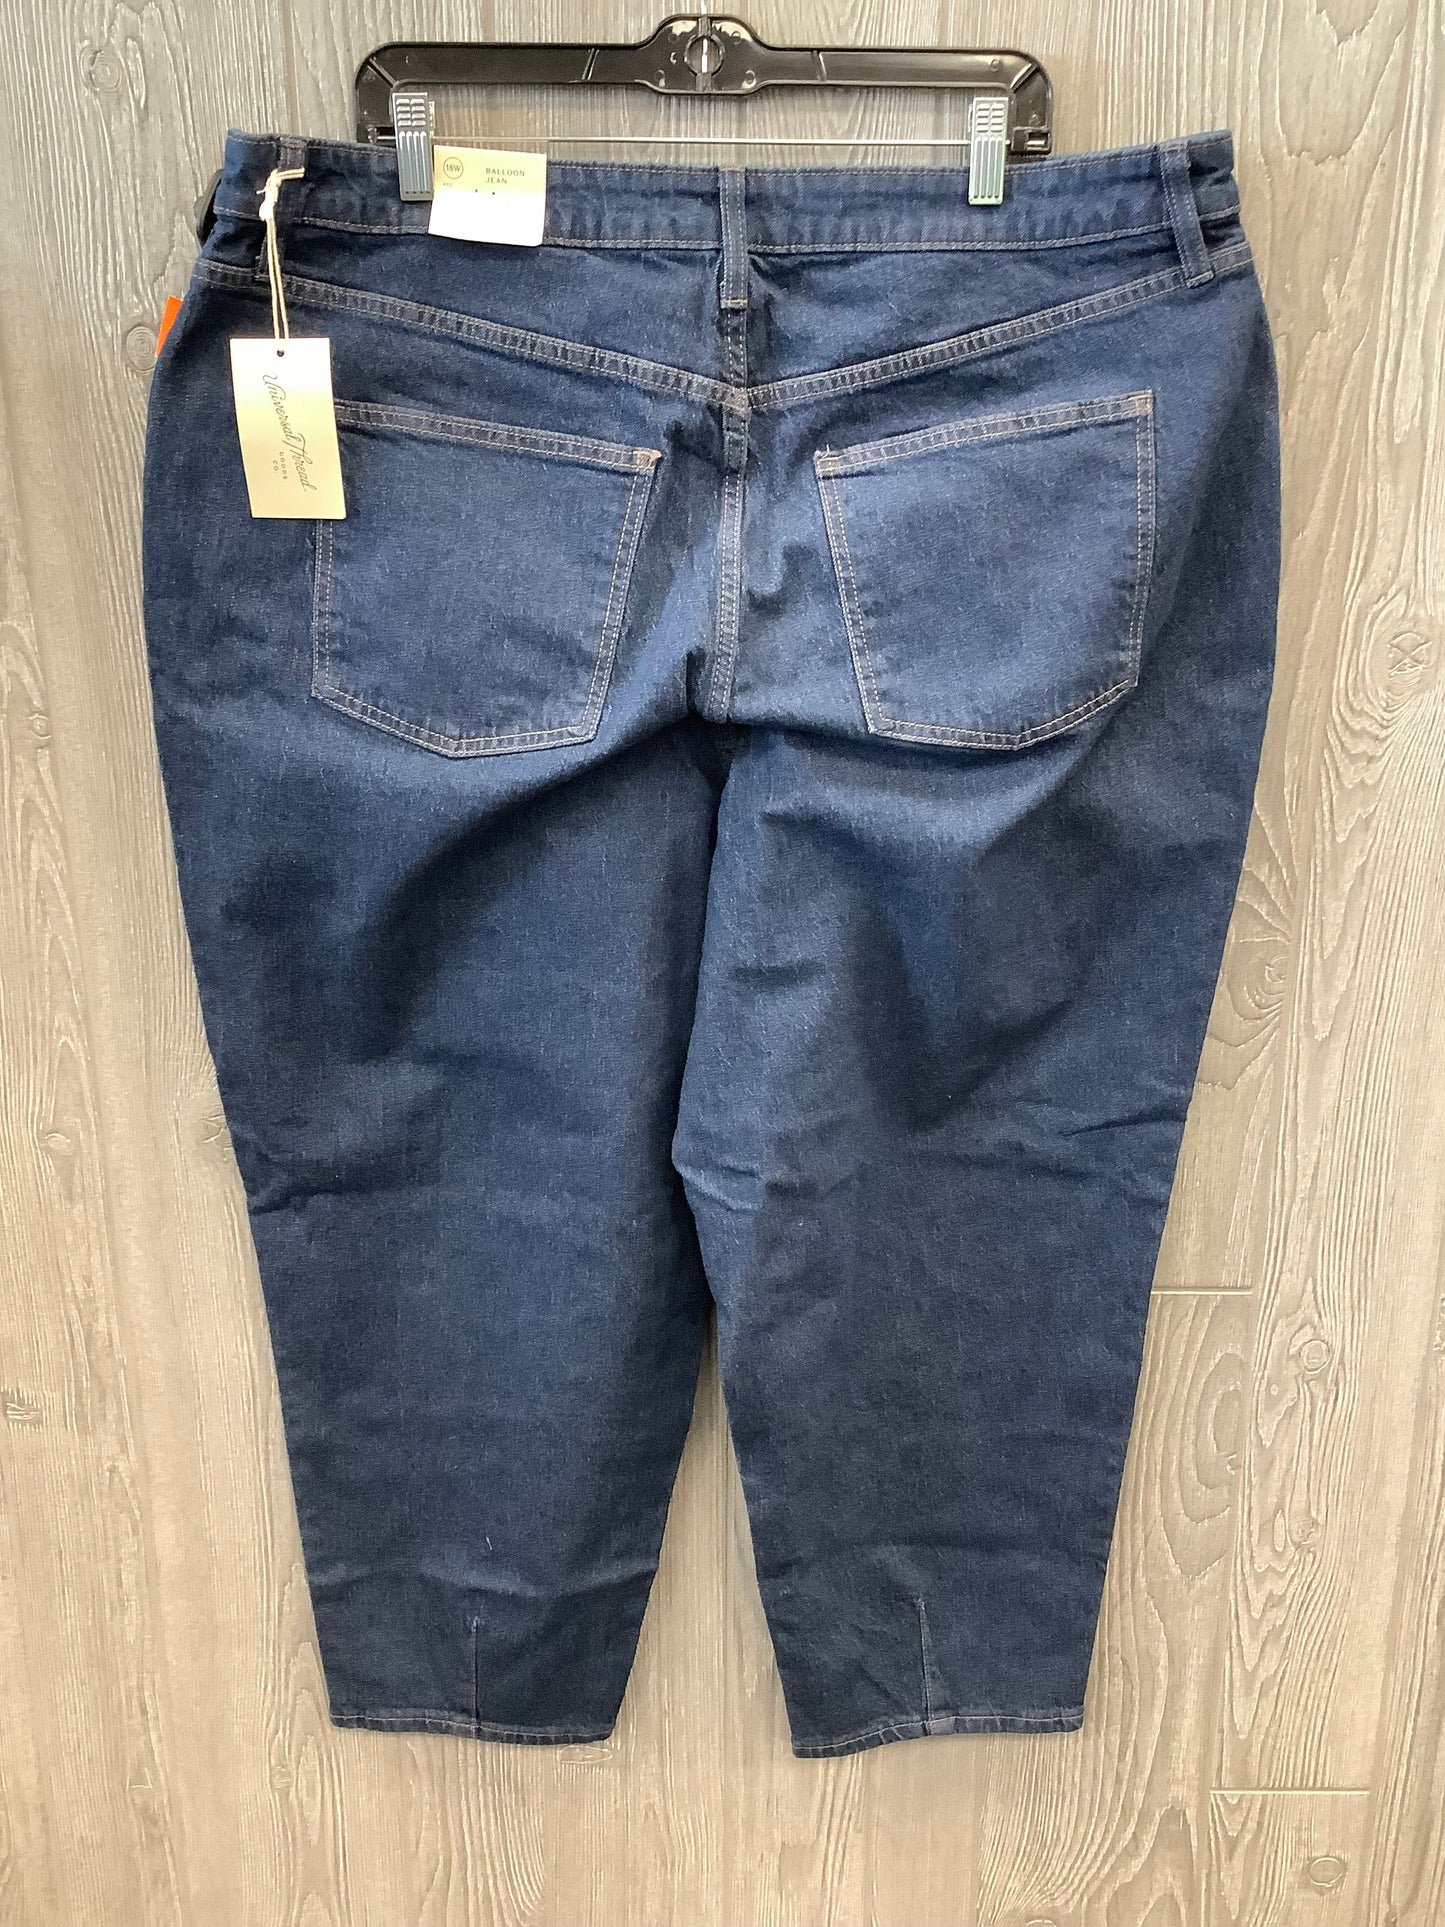 Jeans Relaxed/boyfriend By Universal Thread  Size: 18